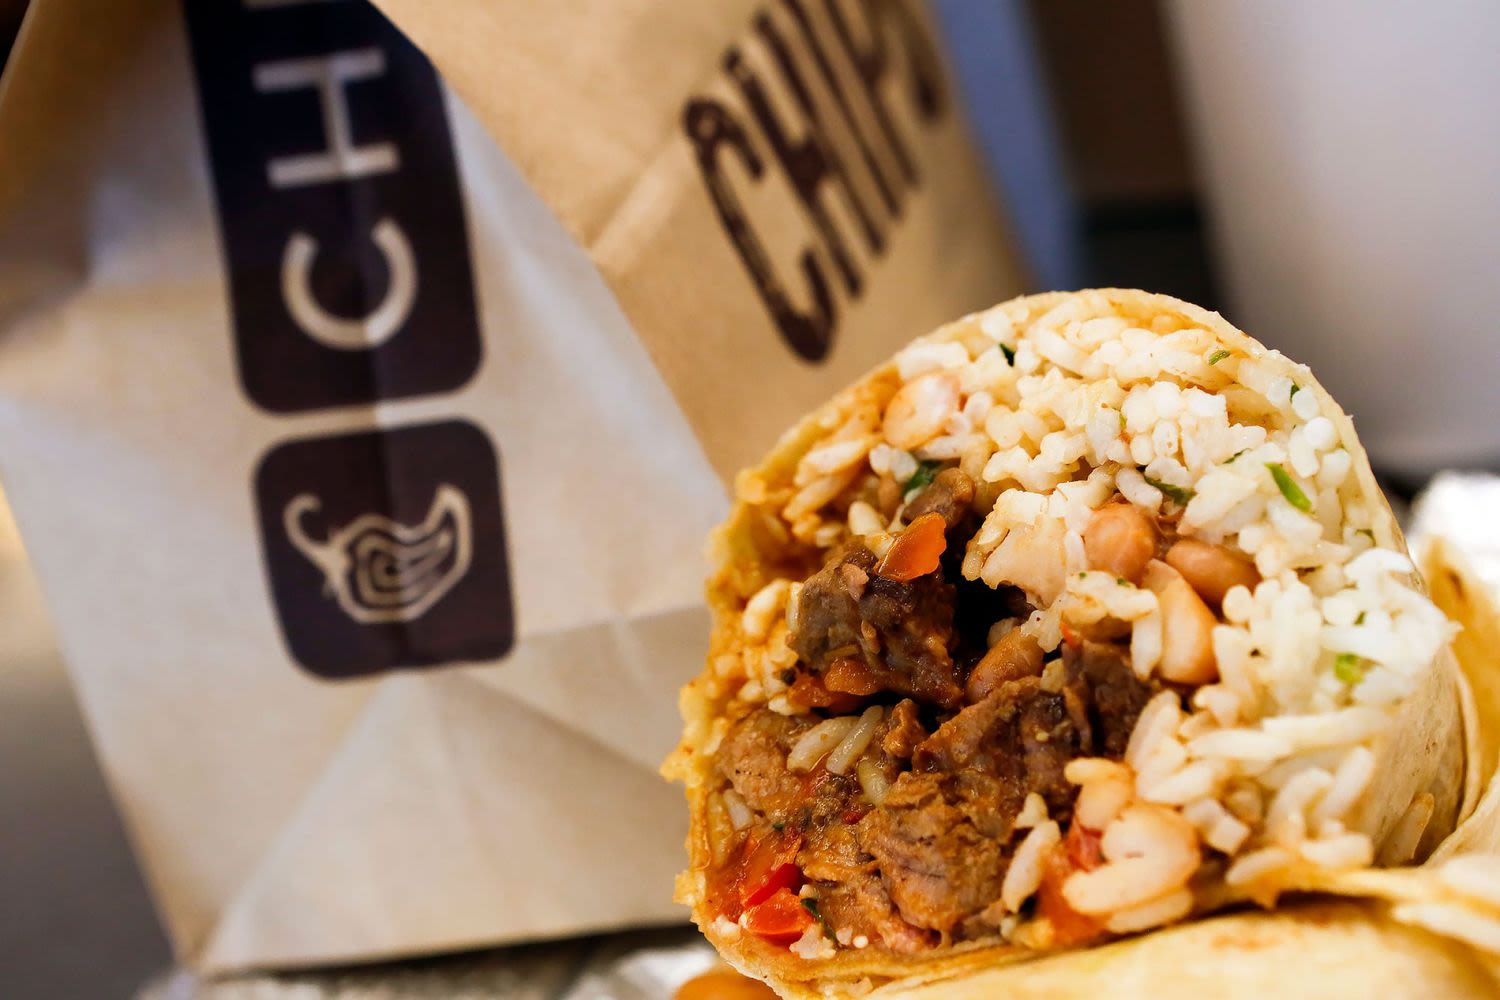 Chipotle hack to get burrito for under $4 has the internet divided - Dexerto